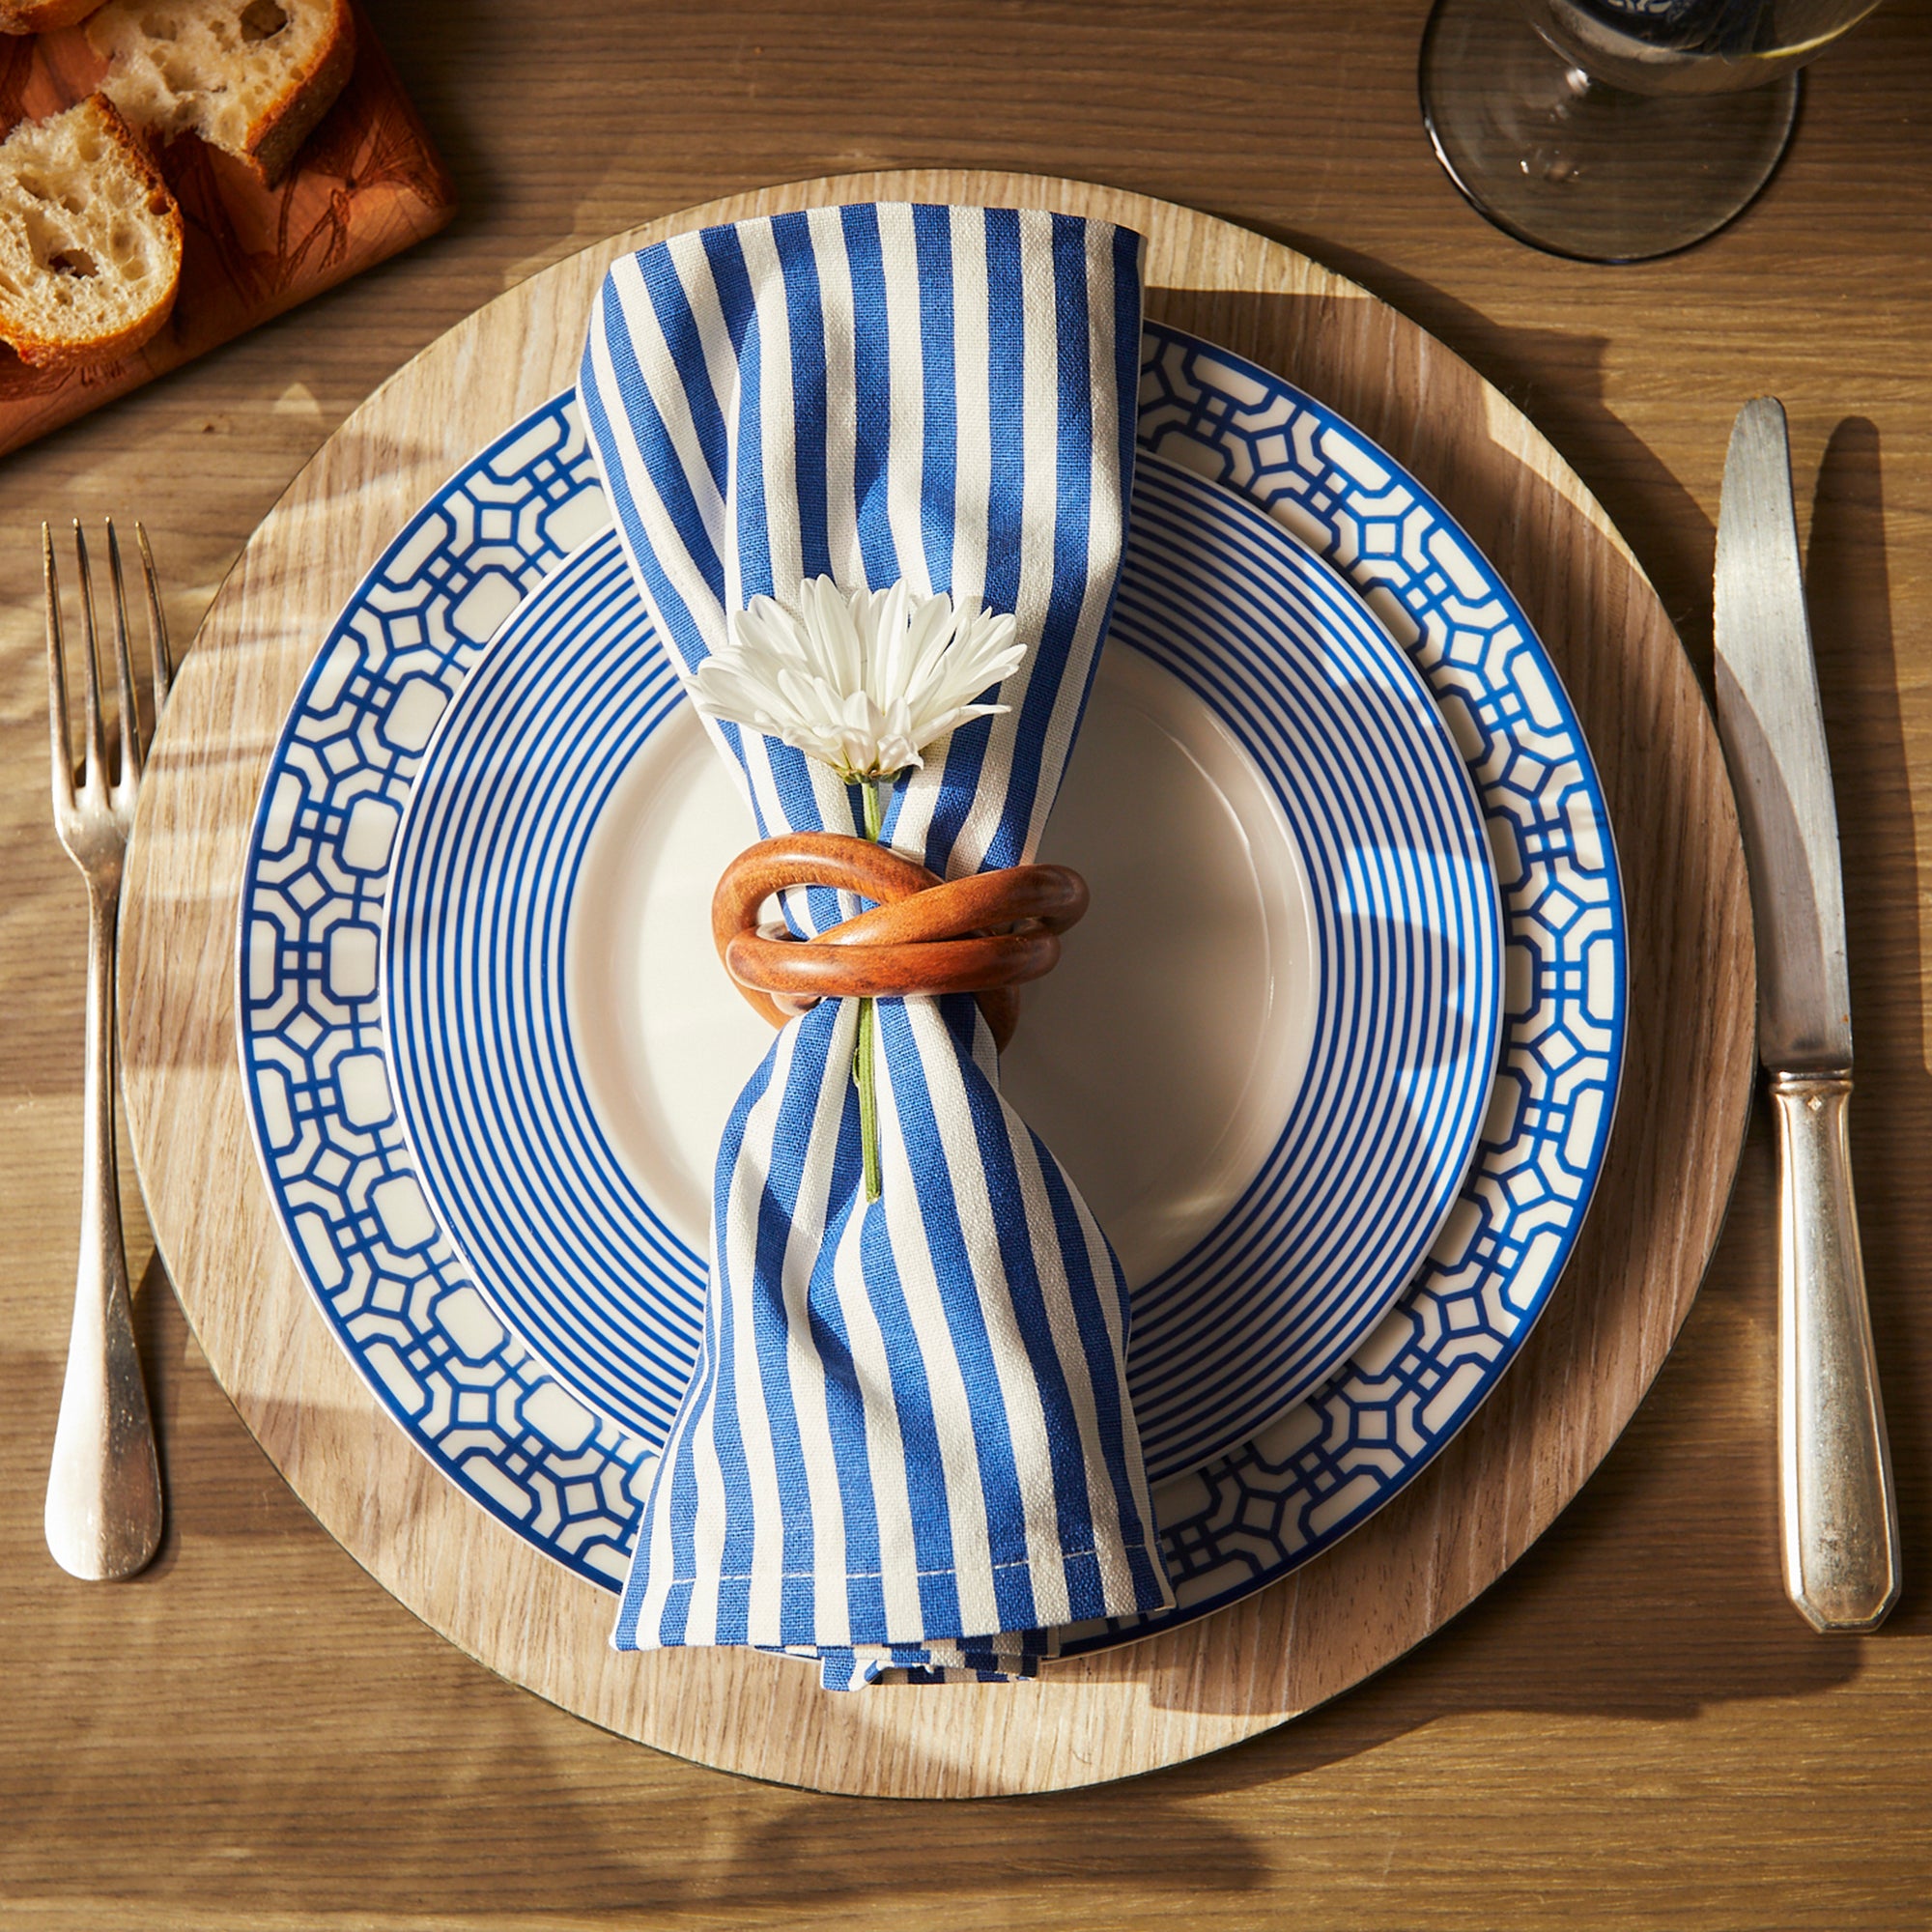 A Newport Garden Gate Rimmed Dinner Plate by Caskata Artisanal Home featuring a geometric blue pattern along the rim, perfect for any contemporary dinnerware or coastal collections.